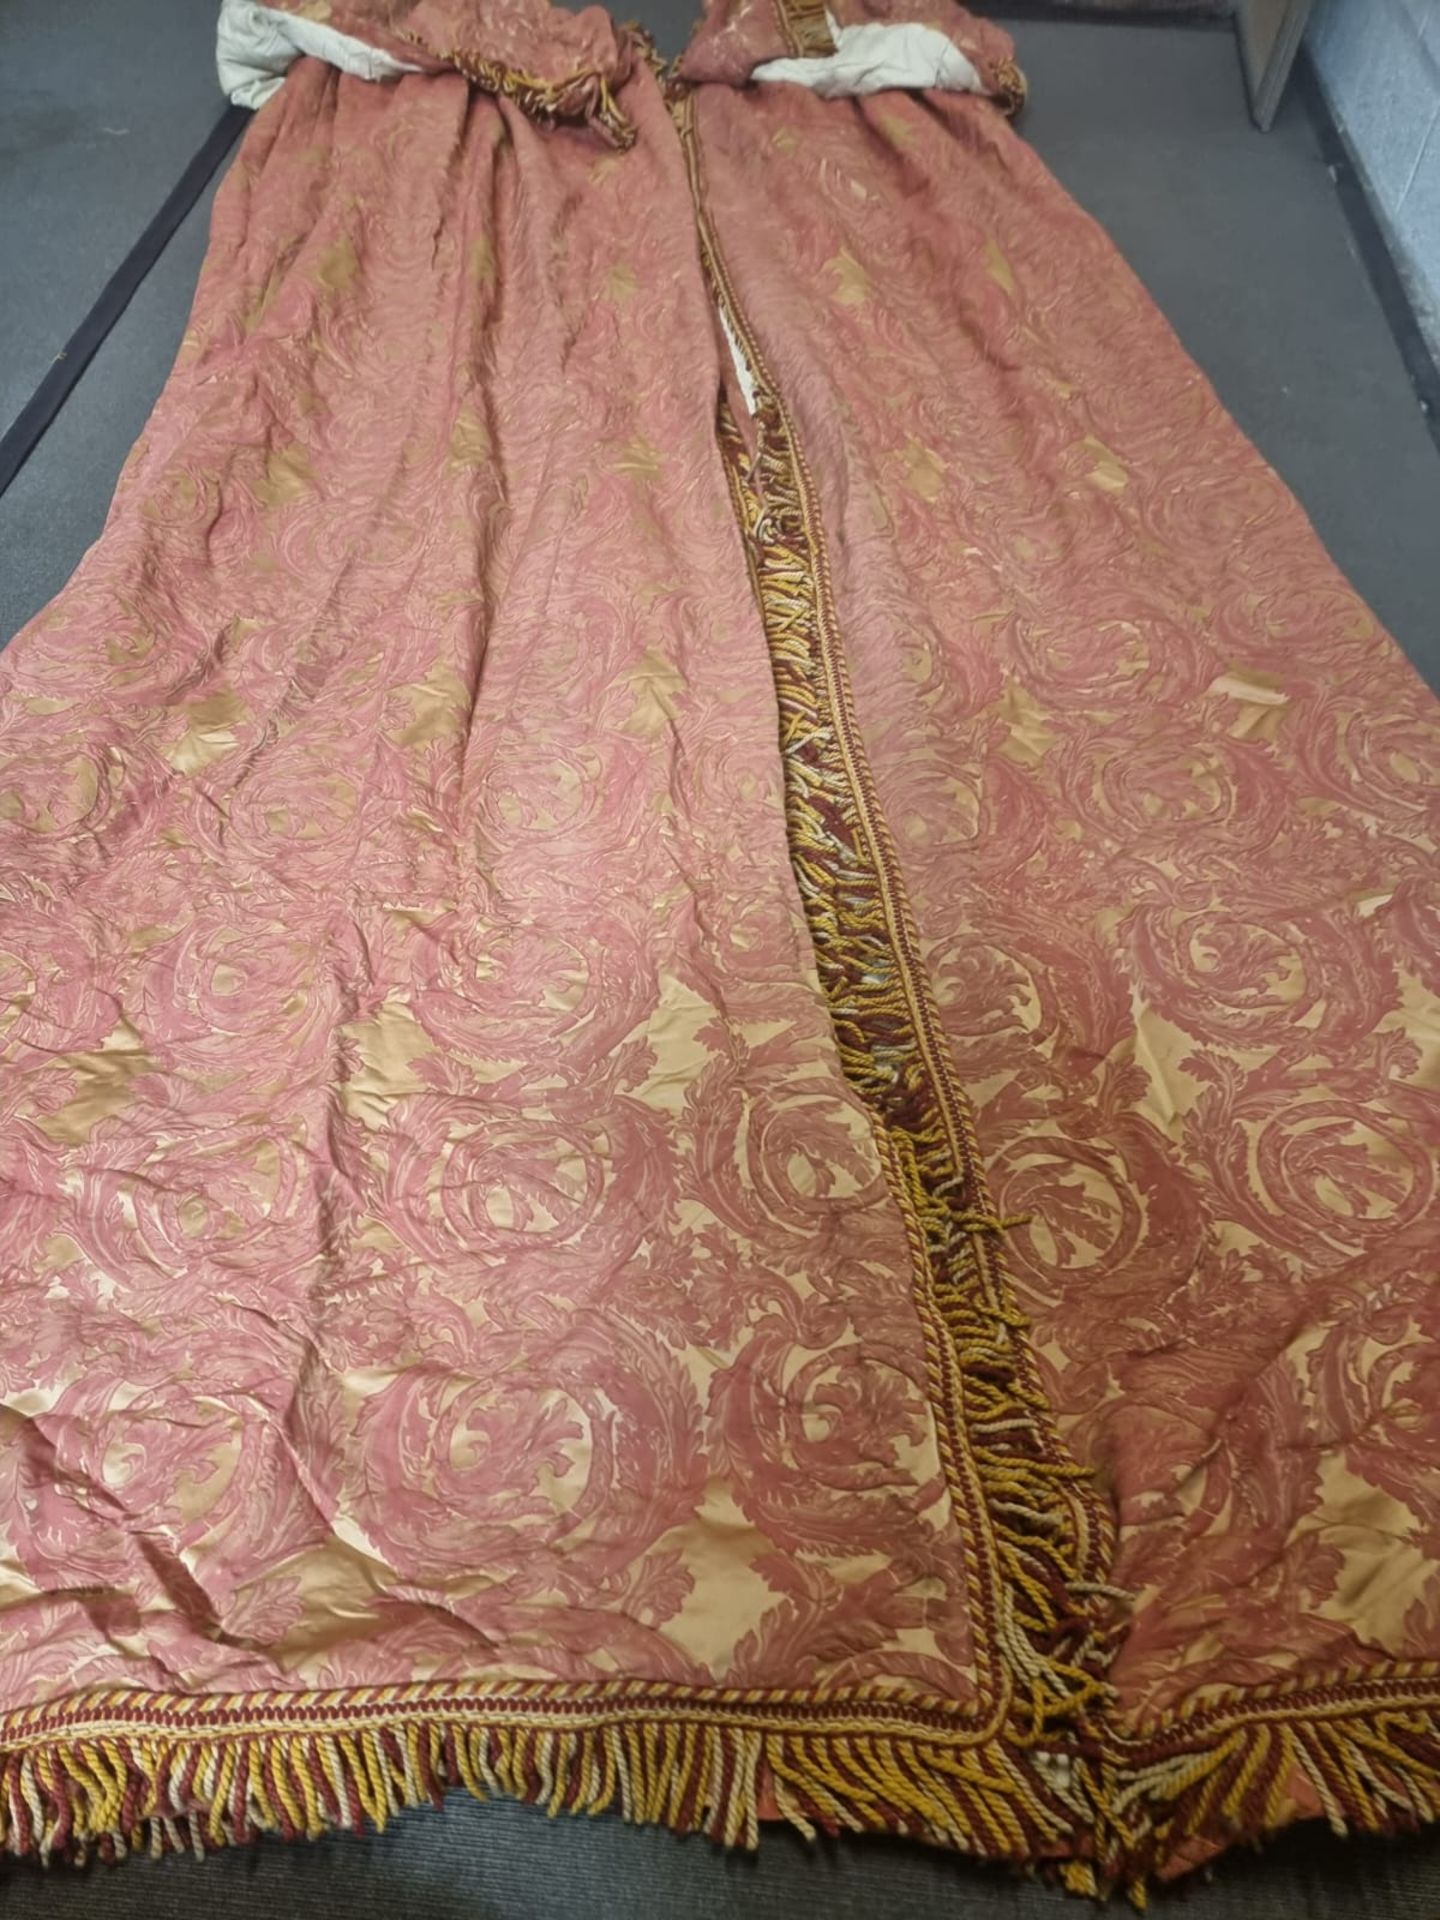 2 x panels of heavy cotton pencil pleat lined drapes with gold and red pattern with a pelmet top